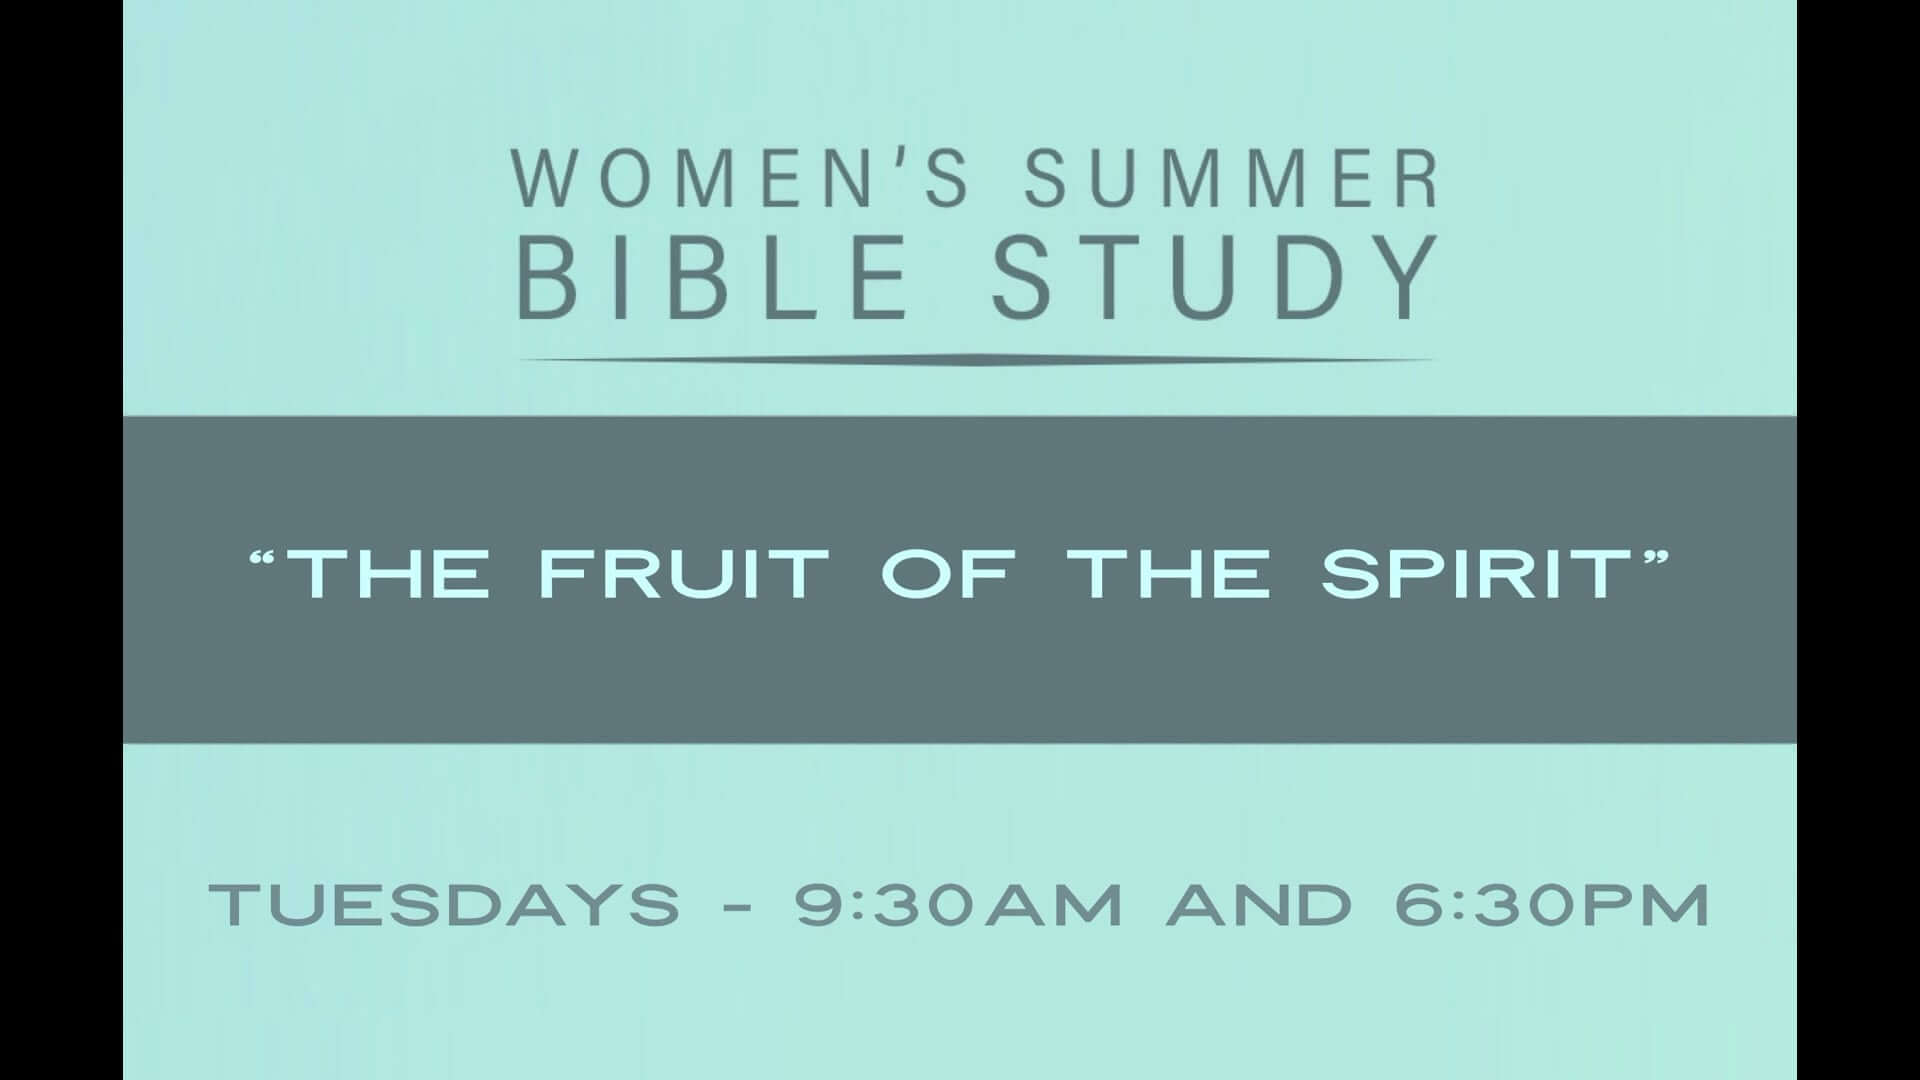 Womens-Summer-Growth-Group-Fruit-of-the-Spirit